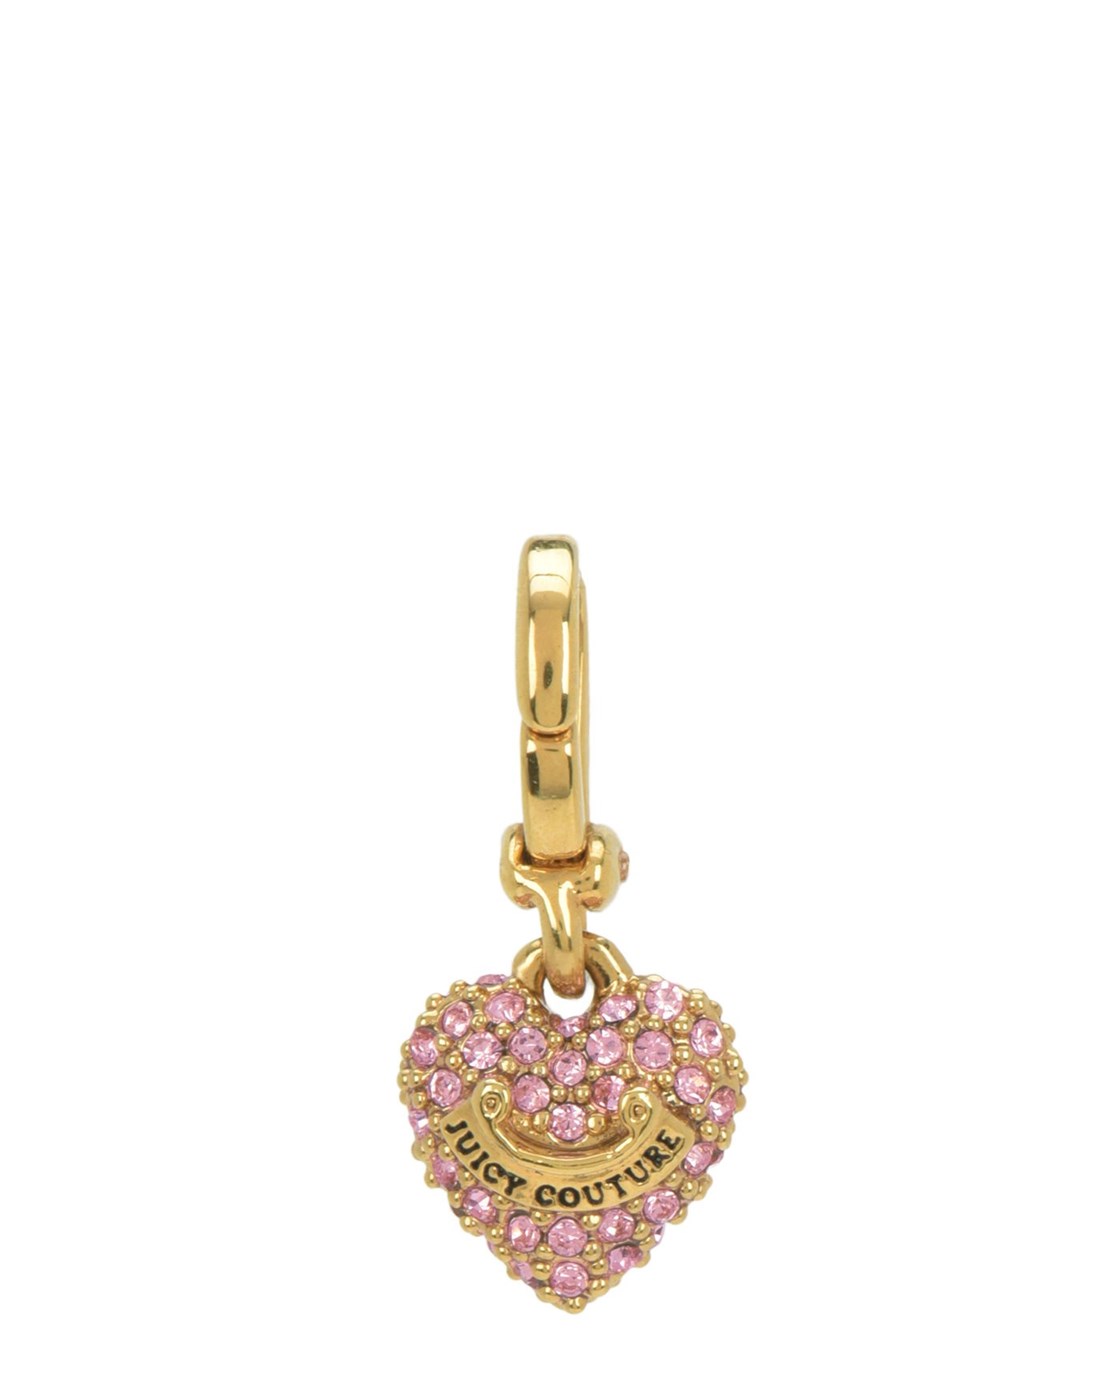 Juicy Couture Pink Pave Heart Charm